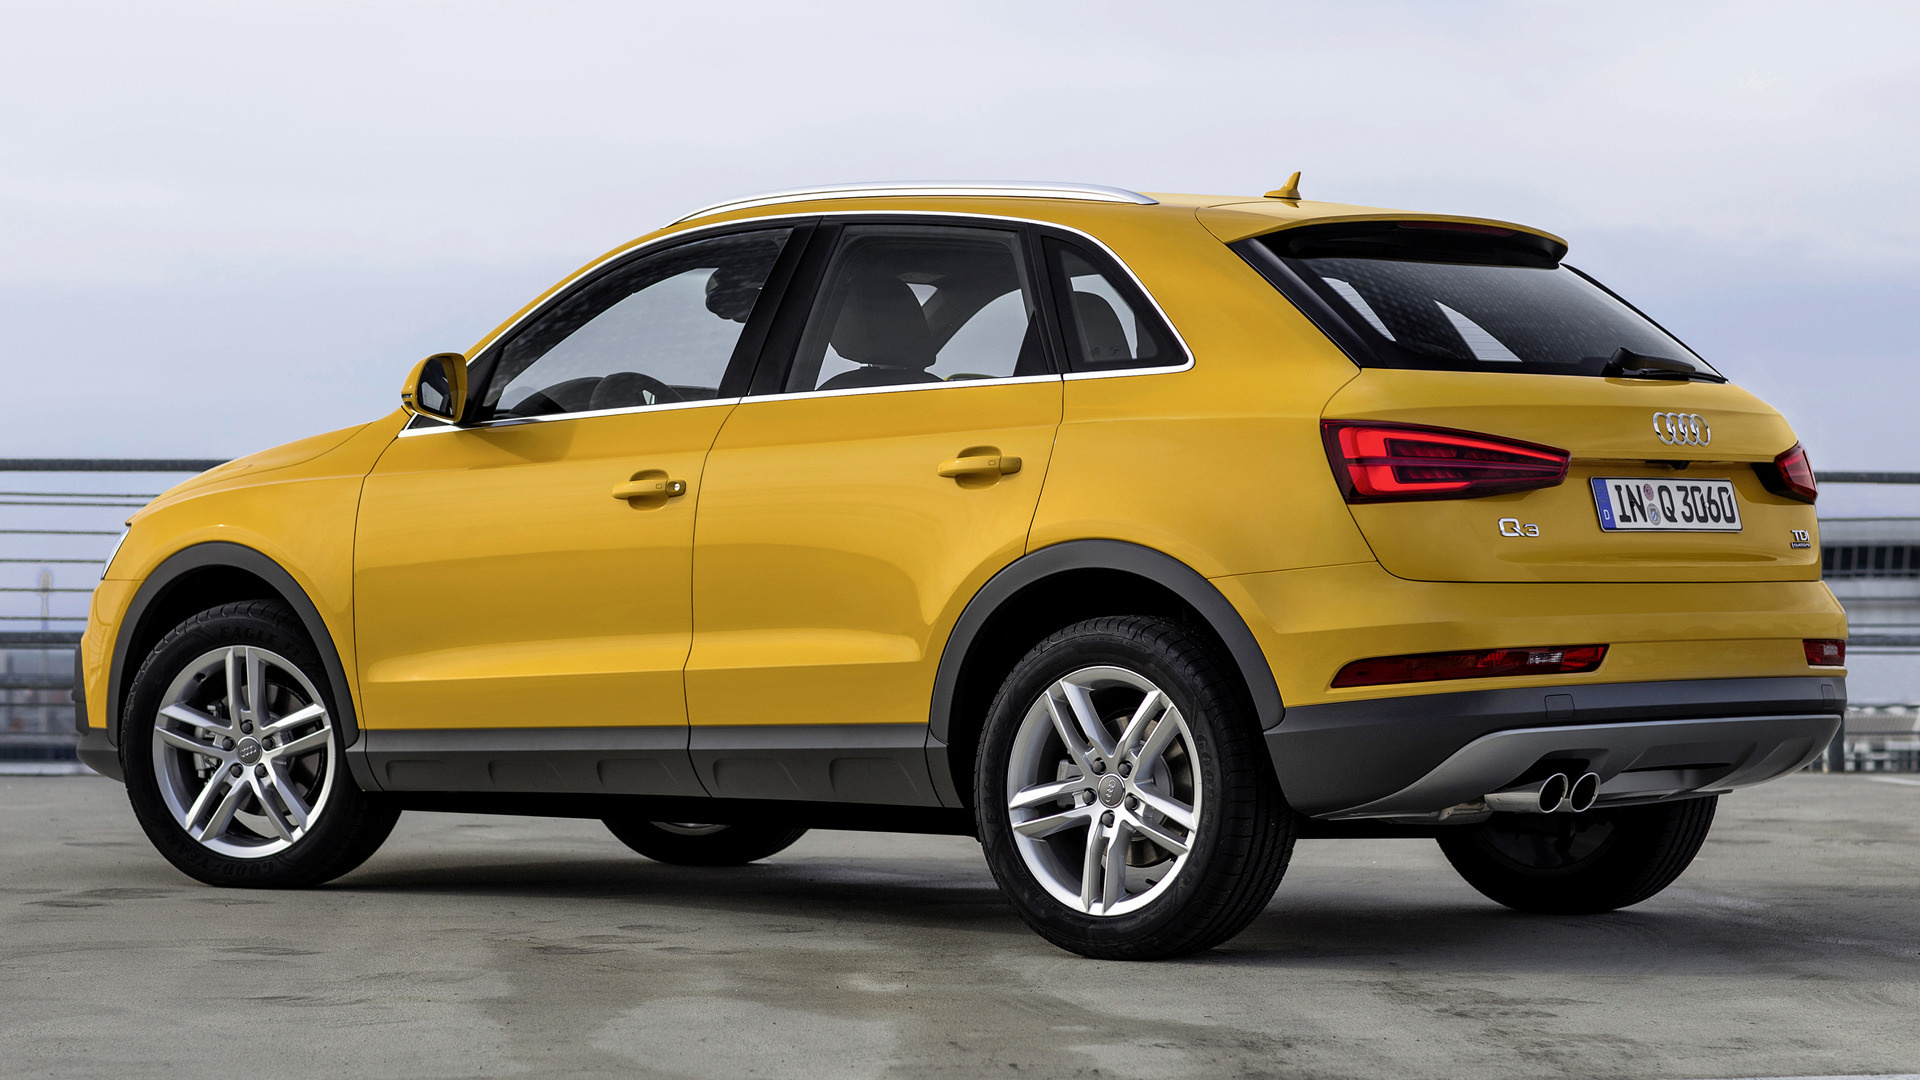 Audi Q3 Off-road Style Package Showcased at Worthersee